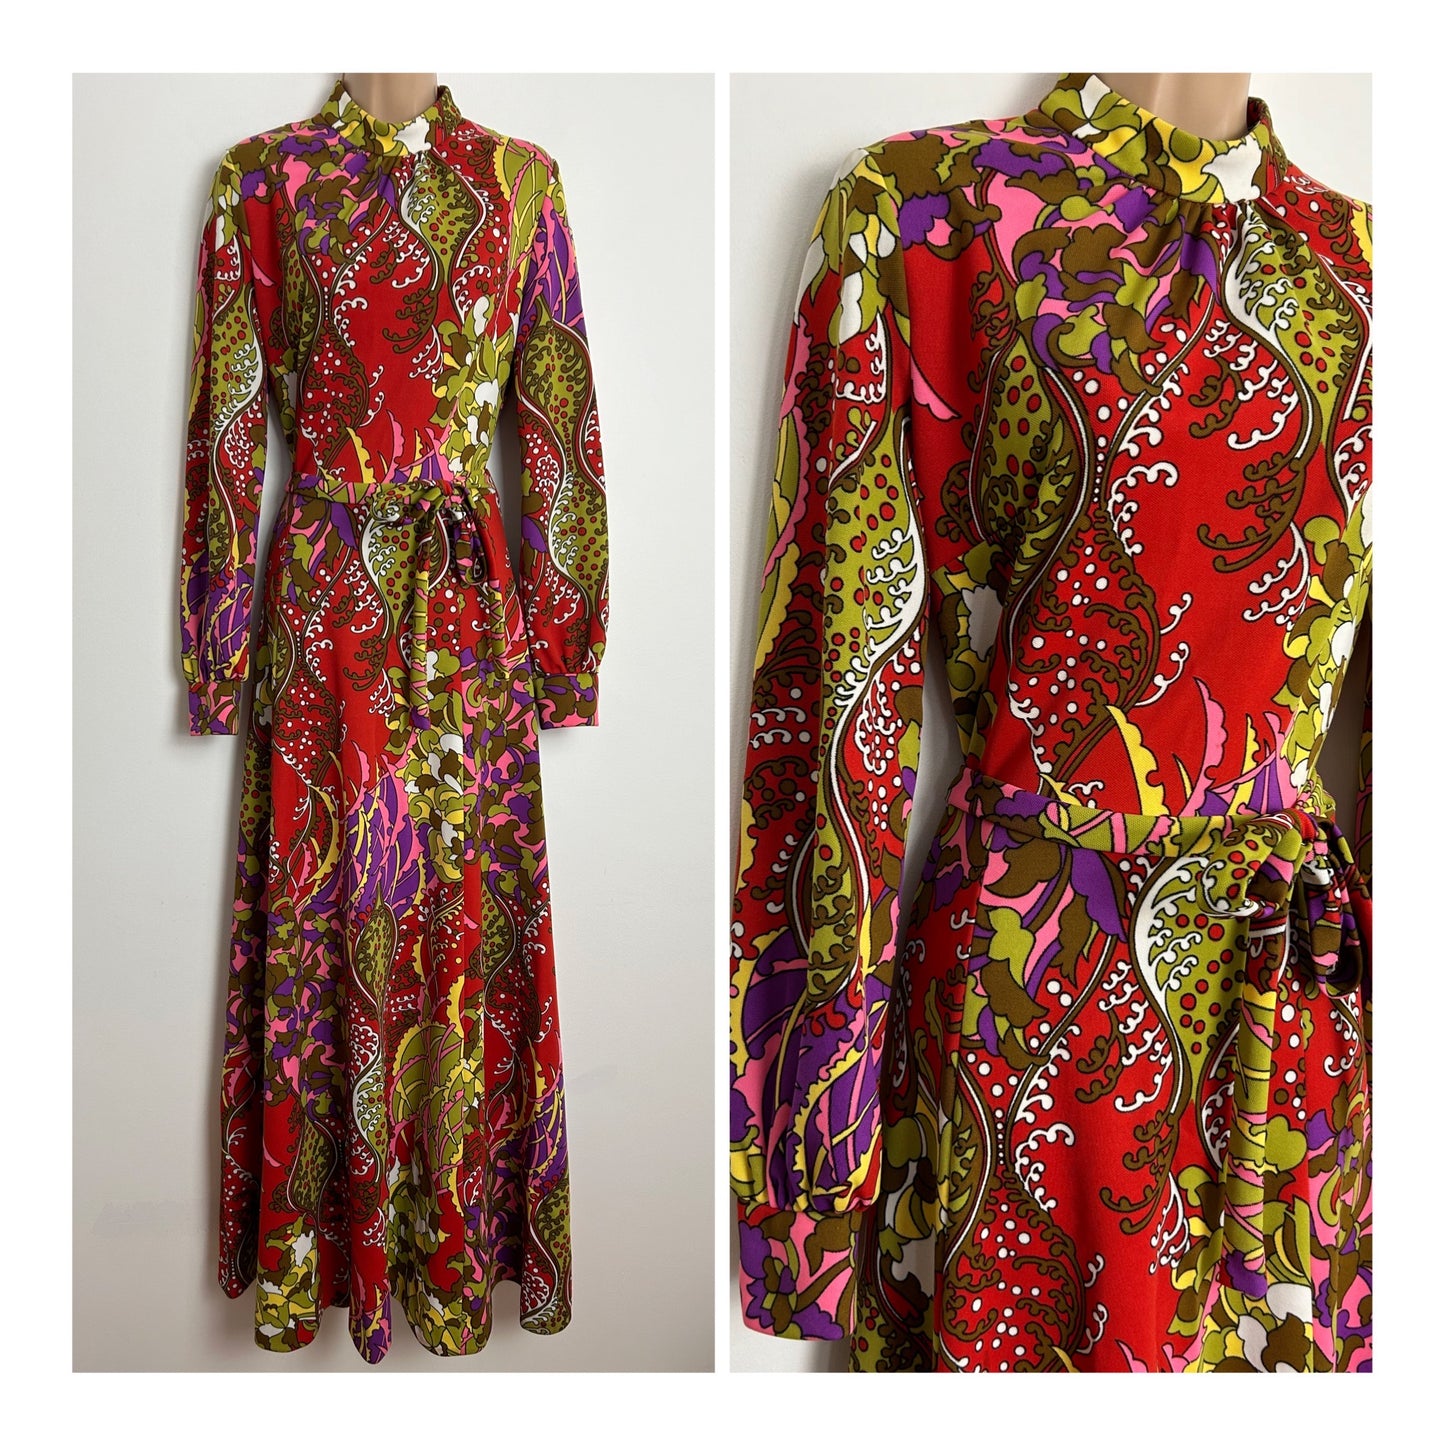 Vintage 1970s UK Size 10 STUNNING Red Green Pink & Purple Nouveau Inspired Long Sleeve Belted Maxi Dress